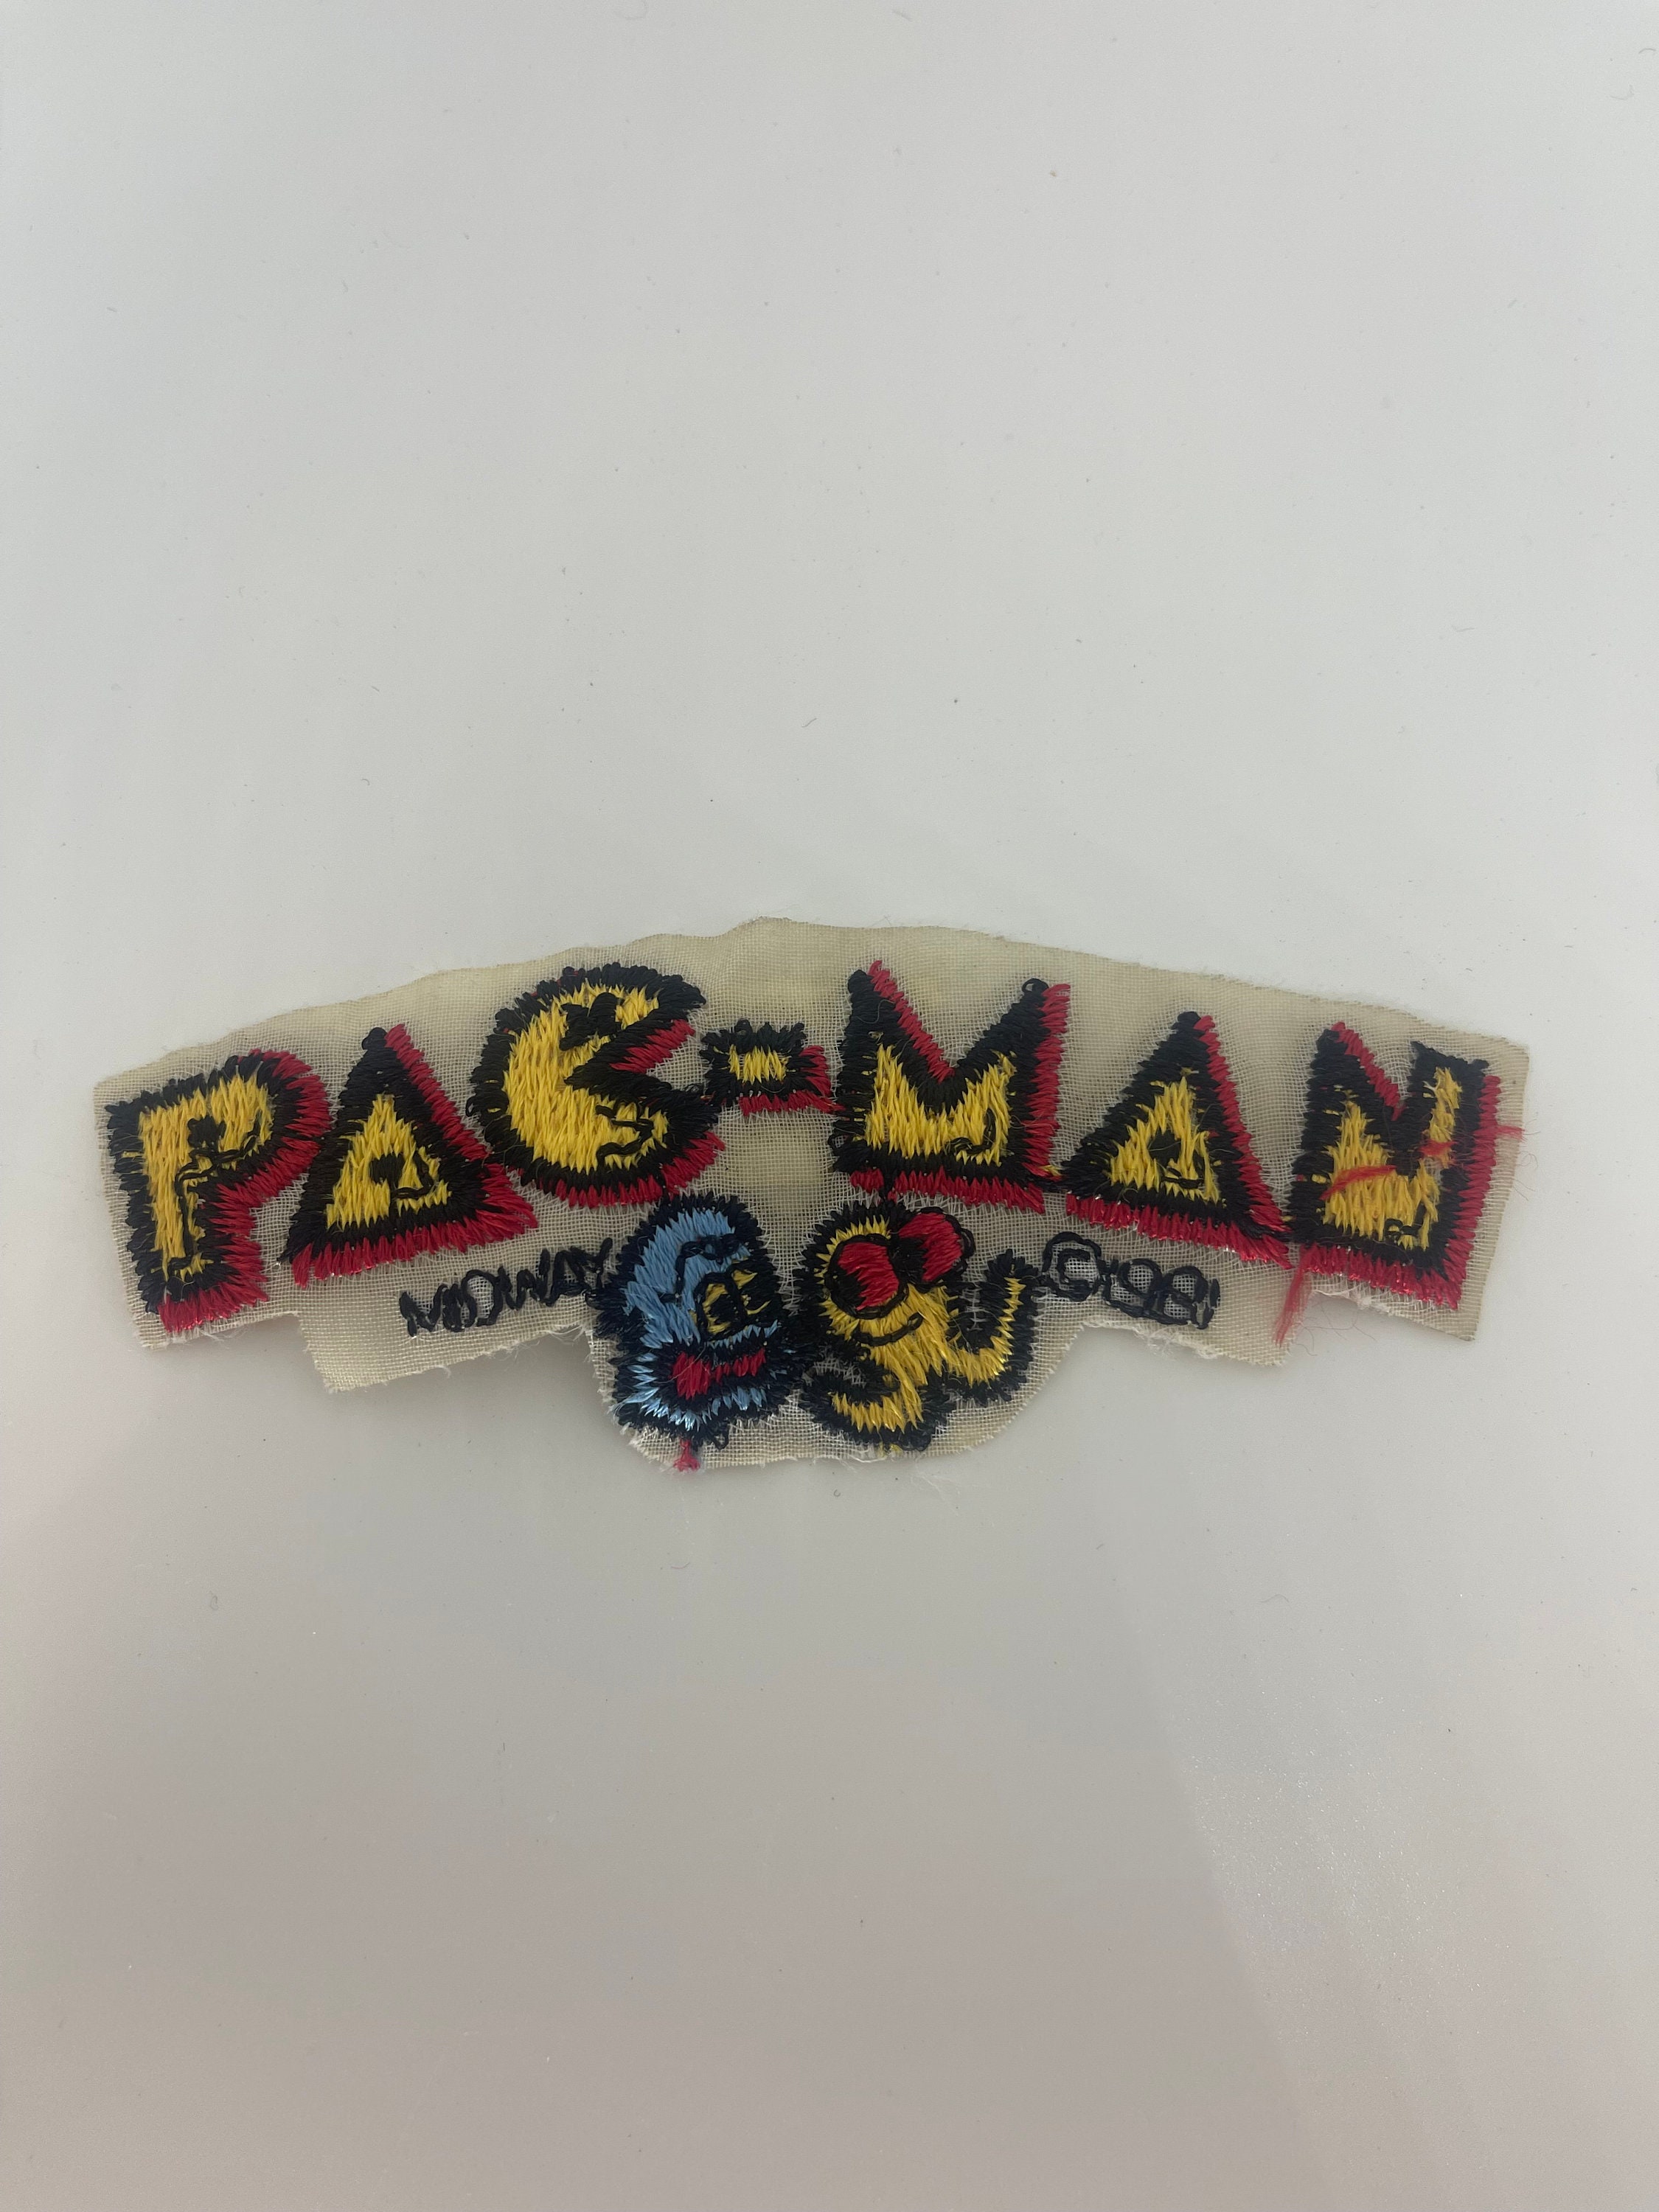 1981 Jot Insignia Pac-Man Embroidered Iron-On Patch VINTAGE 